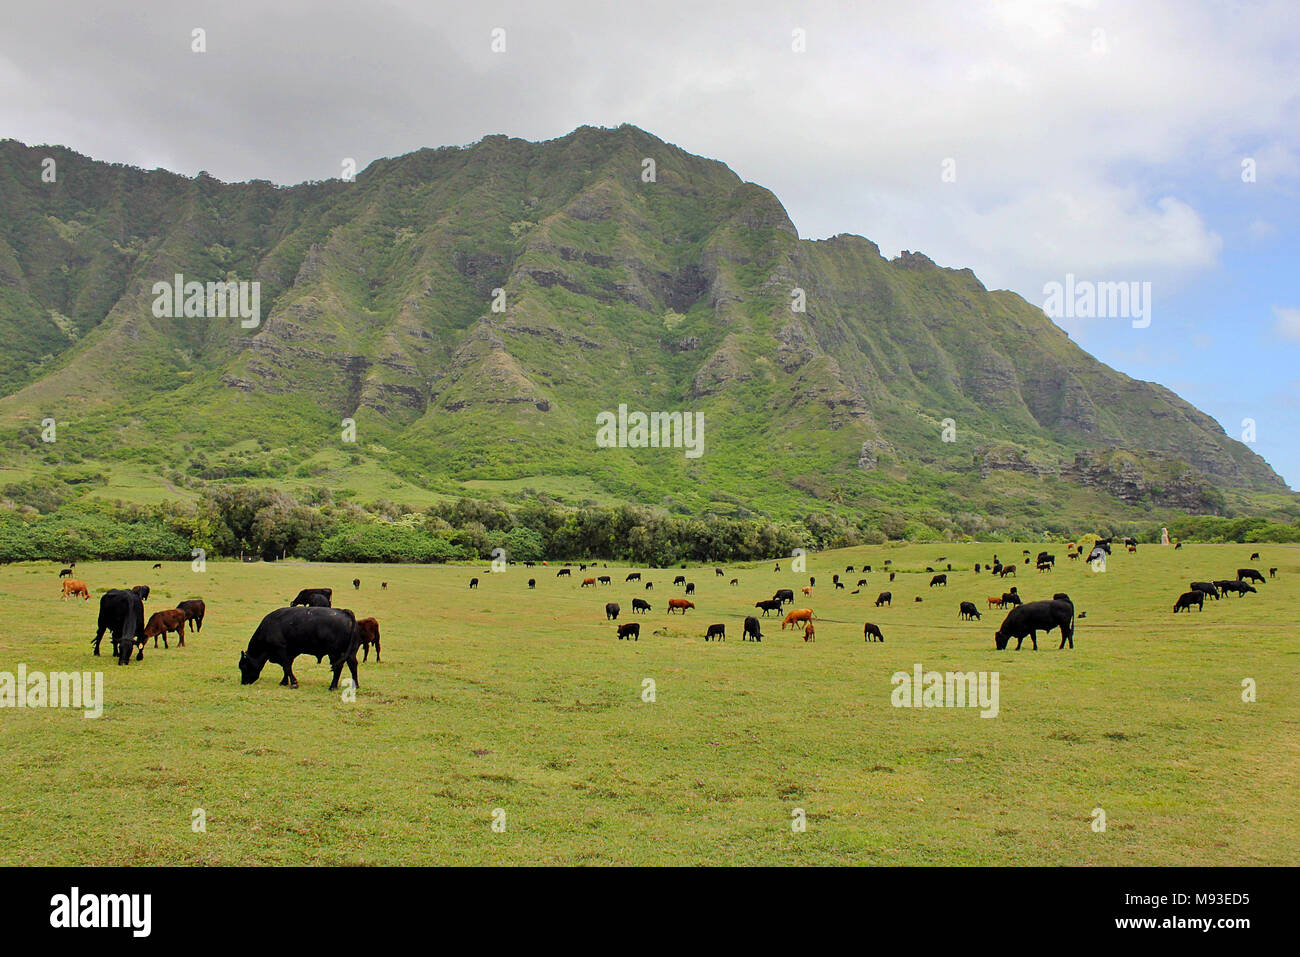 Cattle in the Kaaawa Valley on the island of Oahu, Hawaii, just outside Honolulu. Stock Photo